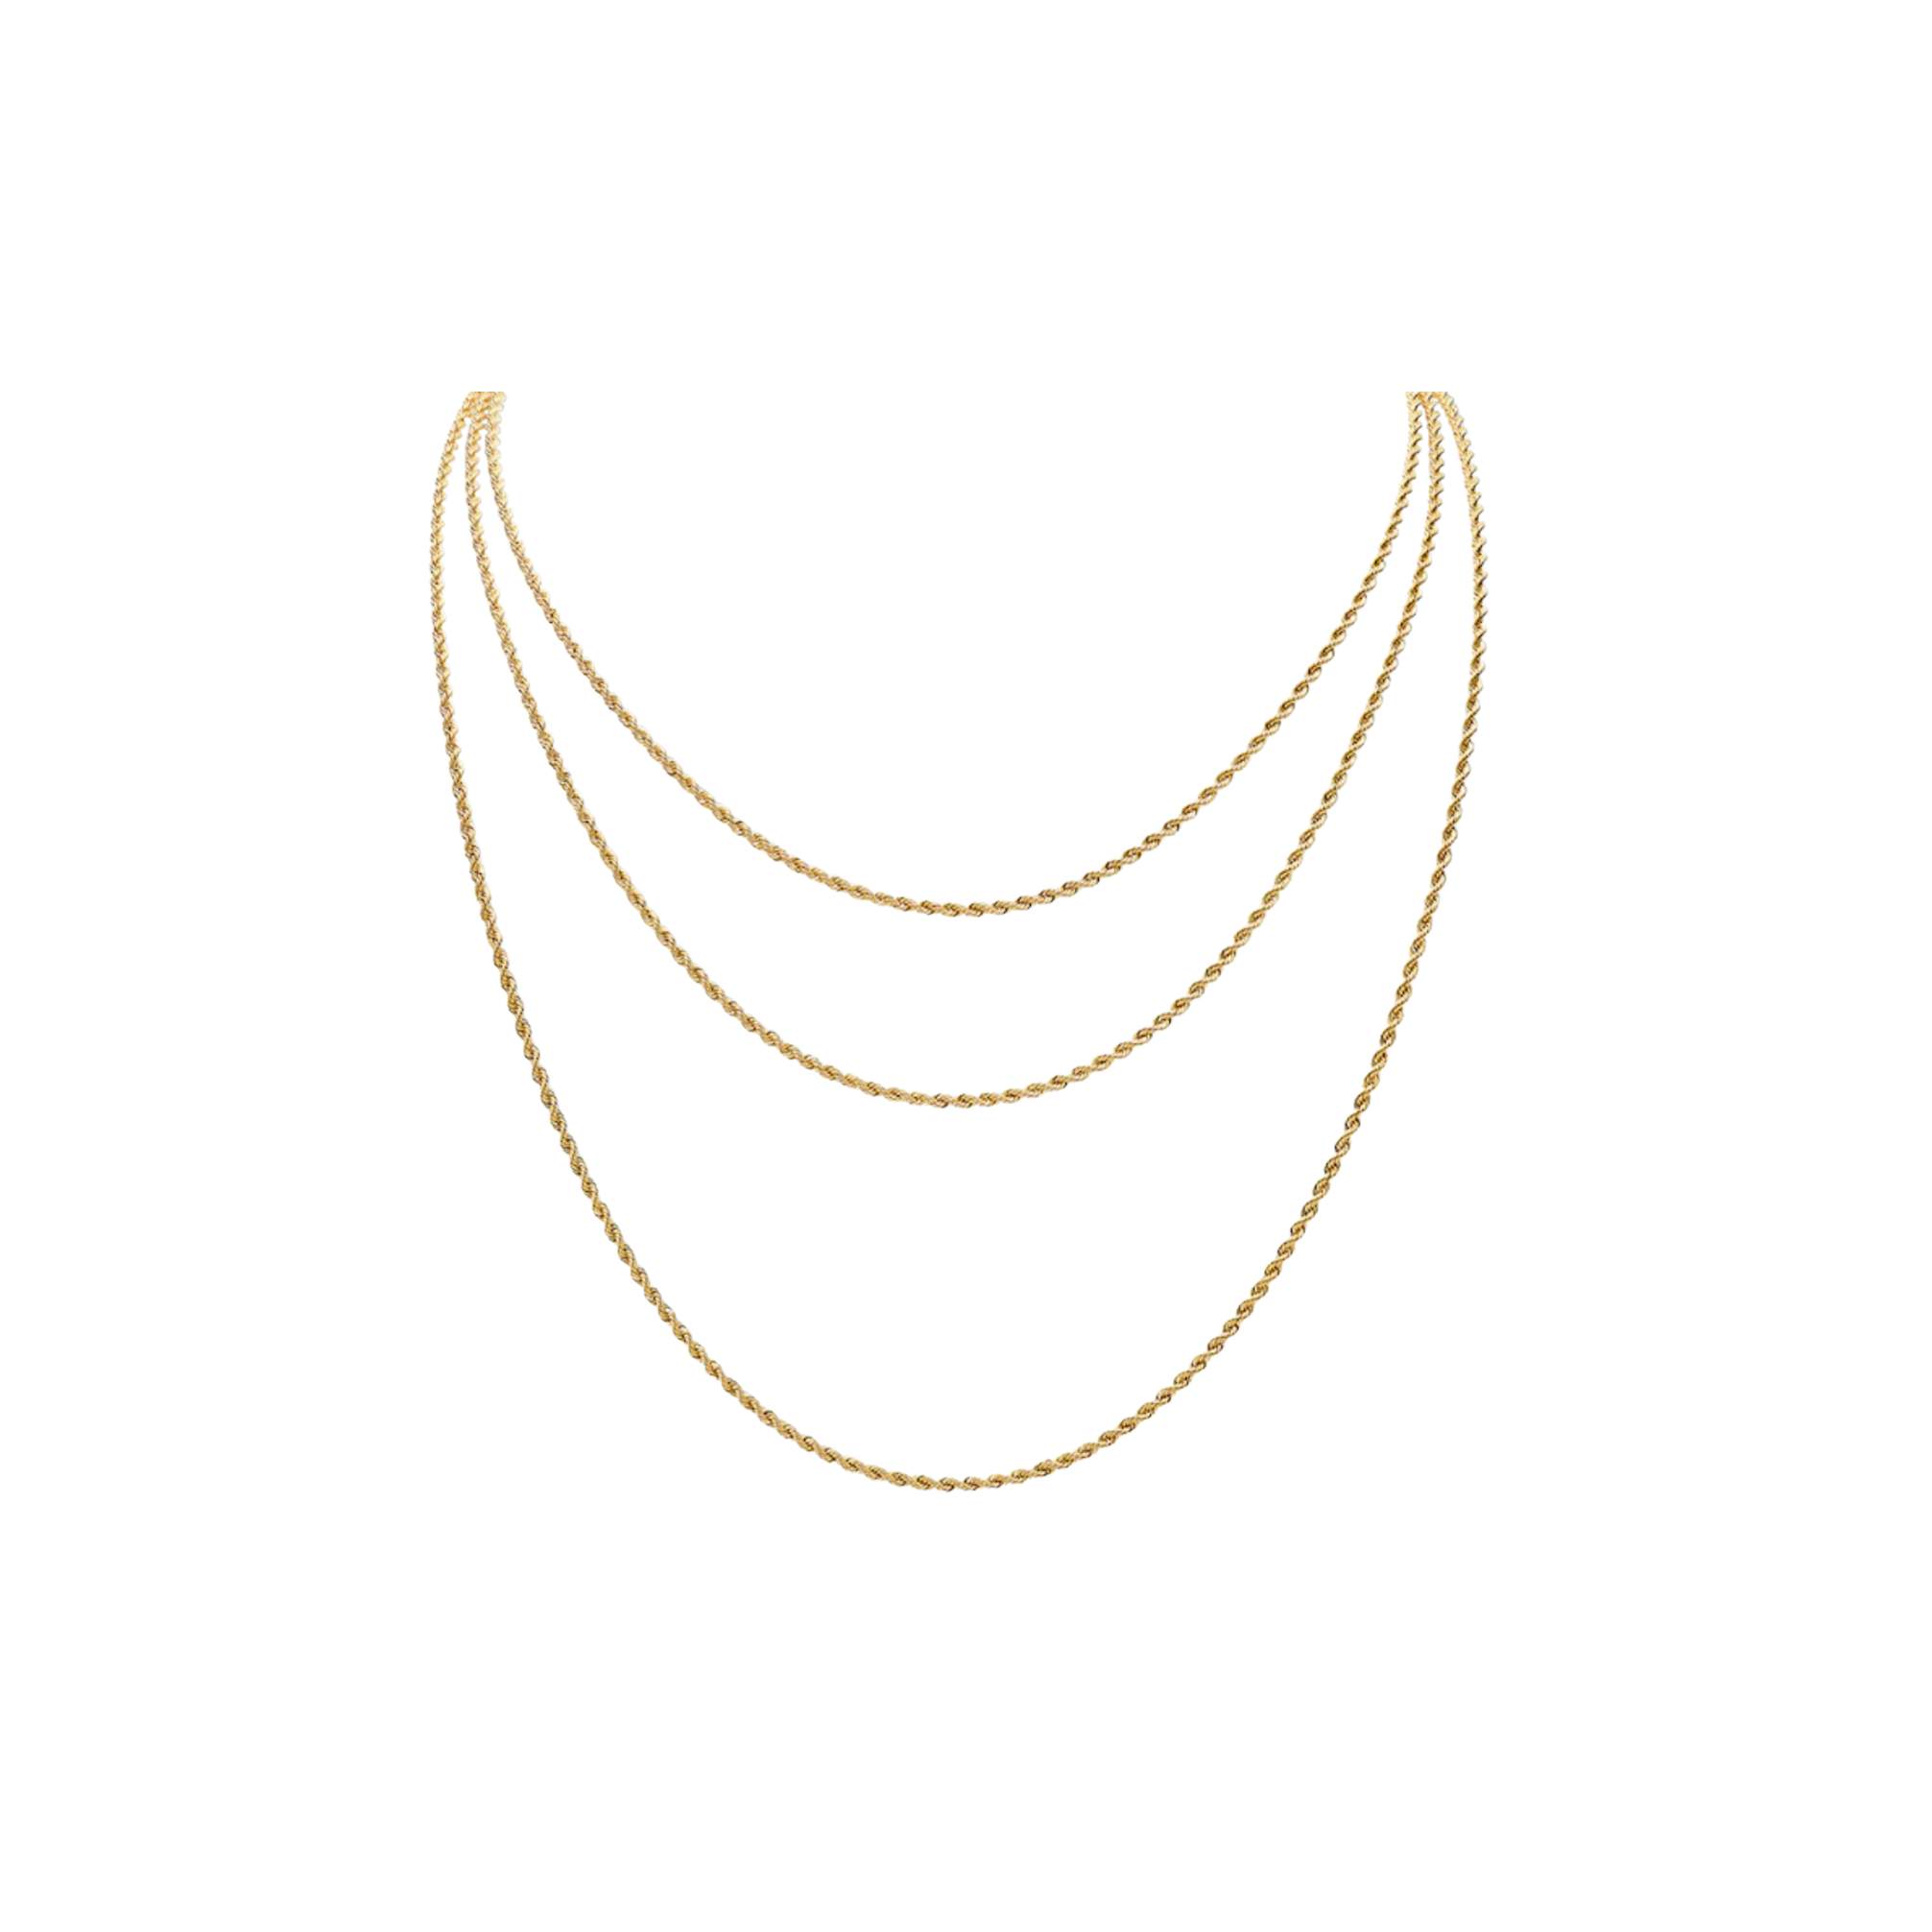 Gold Plated Stacked Chains. Affordable jewelry, Stainless Steel Jewelry, Sterling Silver Jewelry, Gold Plated Jewelry, Rose Gold Plated Jewelry, Cubic Zirconia Jewelry, High Quality Jewelry, Women Owned Small Business, Dainty Jewelry, Tennis Chain, Rope Chain, Herringbone Jewelry, Signet Ring, Baguette Ring, Women’s Jewelry, Hoop Earrings, Gold Hoops, Silver Hoops.